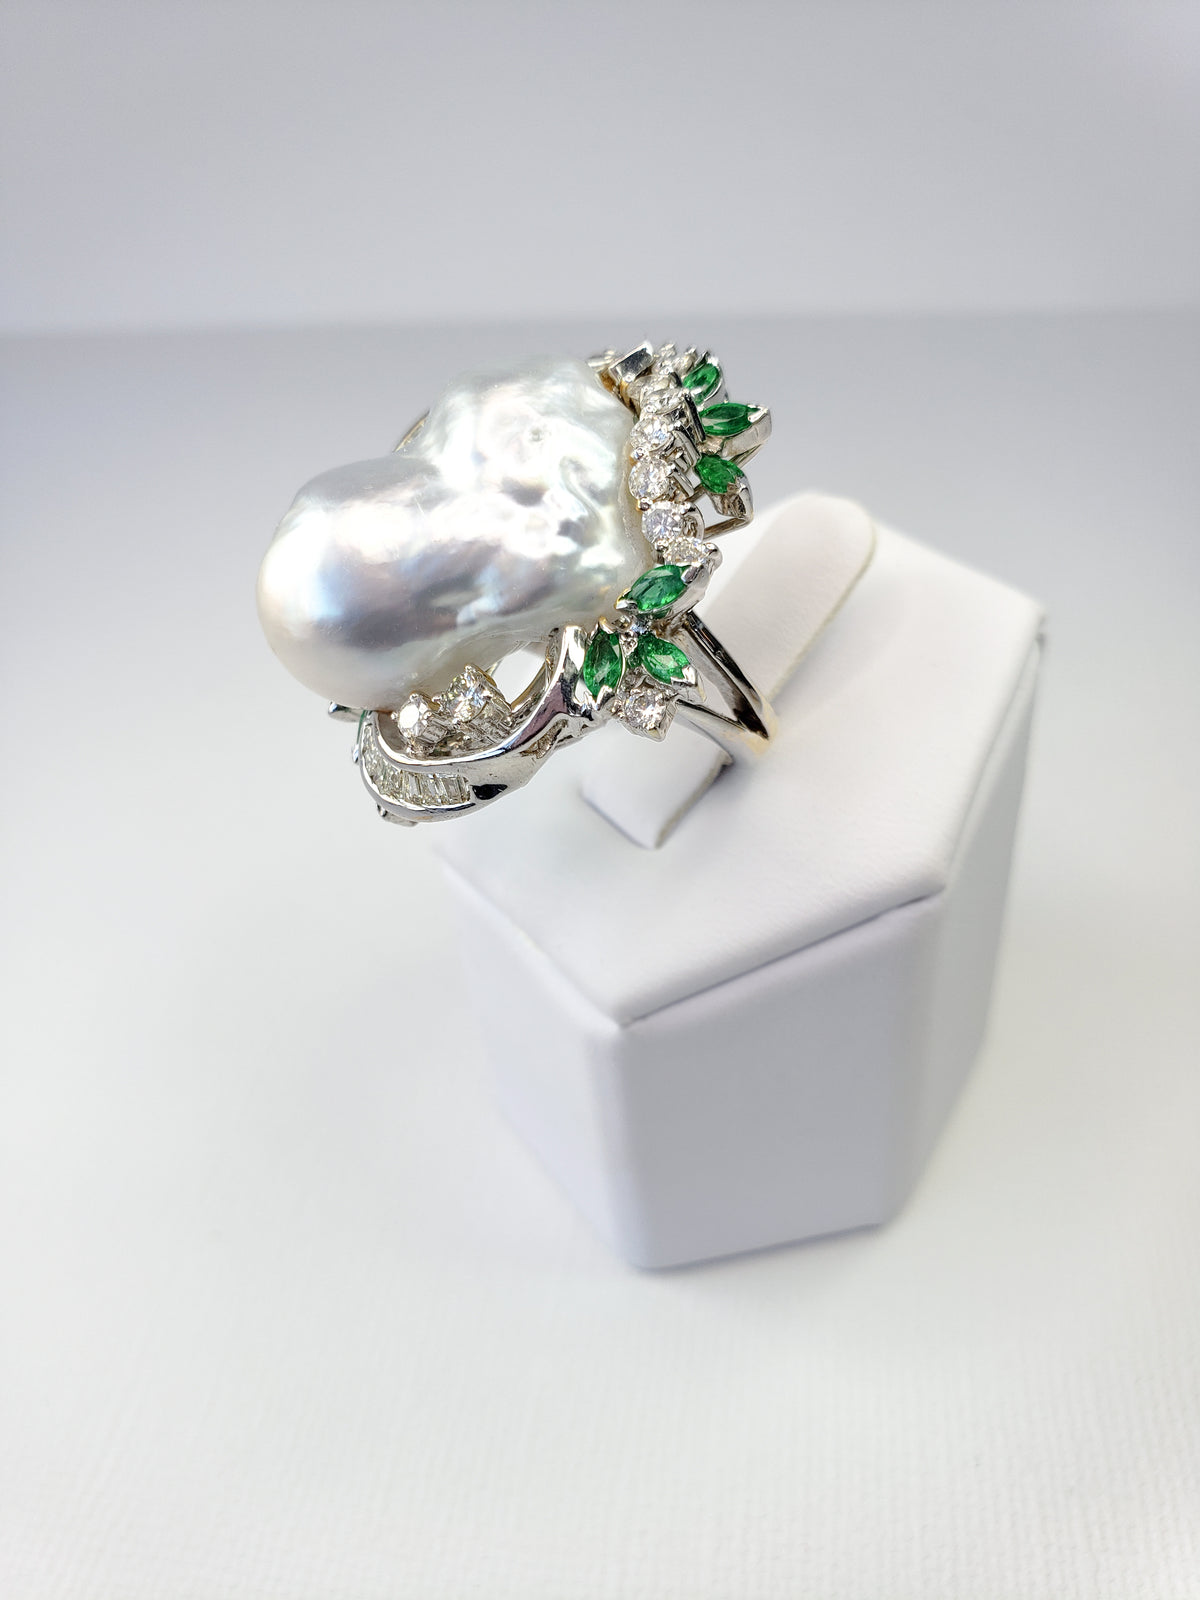 Giant South Sea Pearl and Emerald 18K White Gold Ring